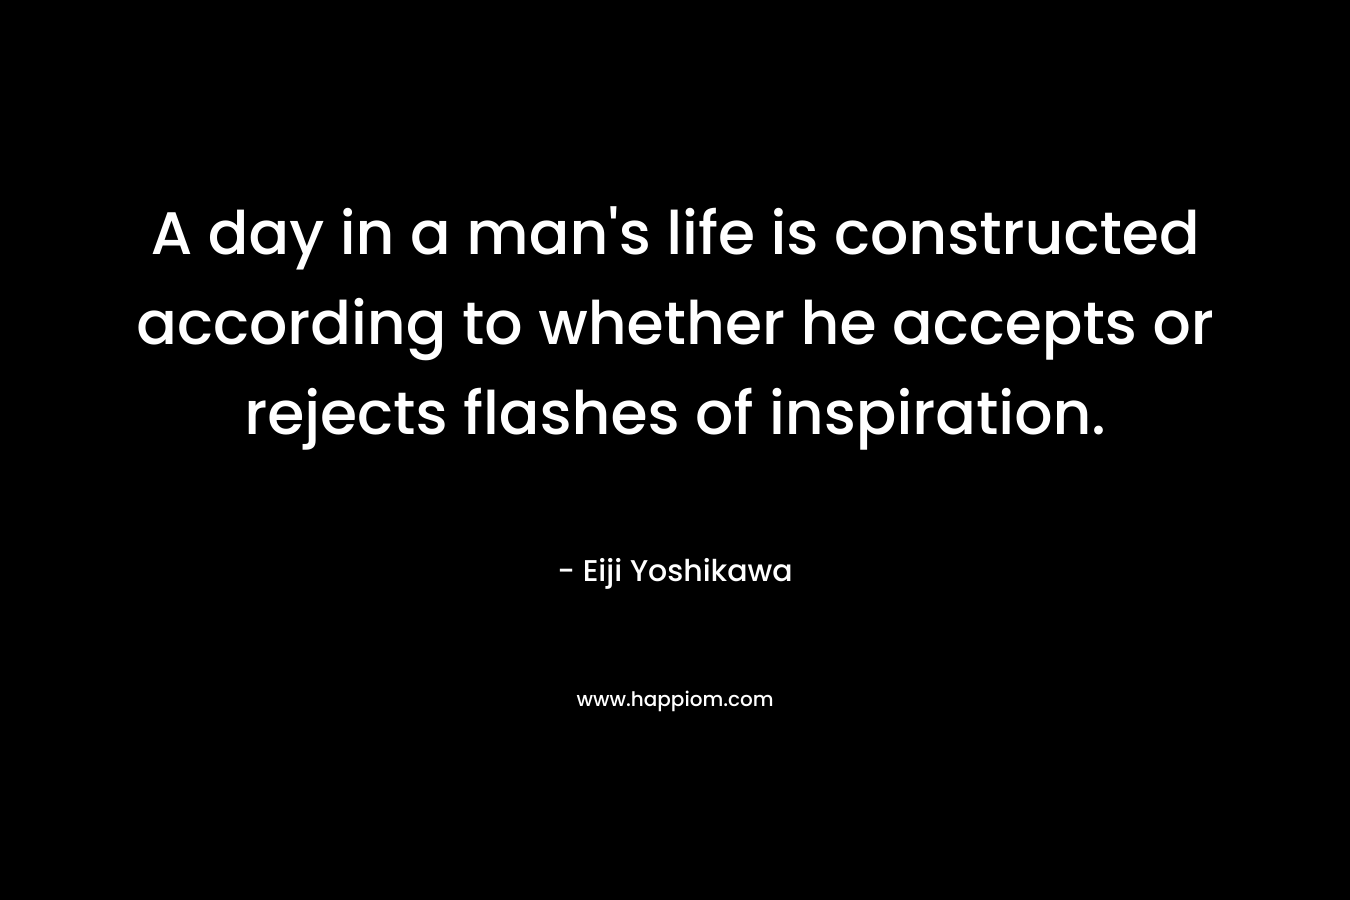 A day in a man’s life is constructed according to whether he accepts or rejects flashes of inspiration. – Eiji Yoshikawa